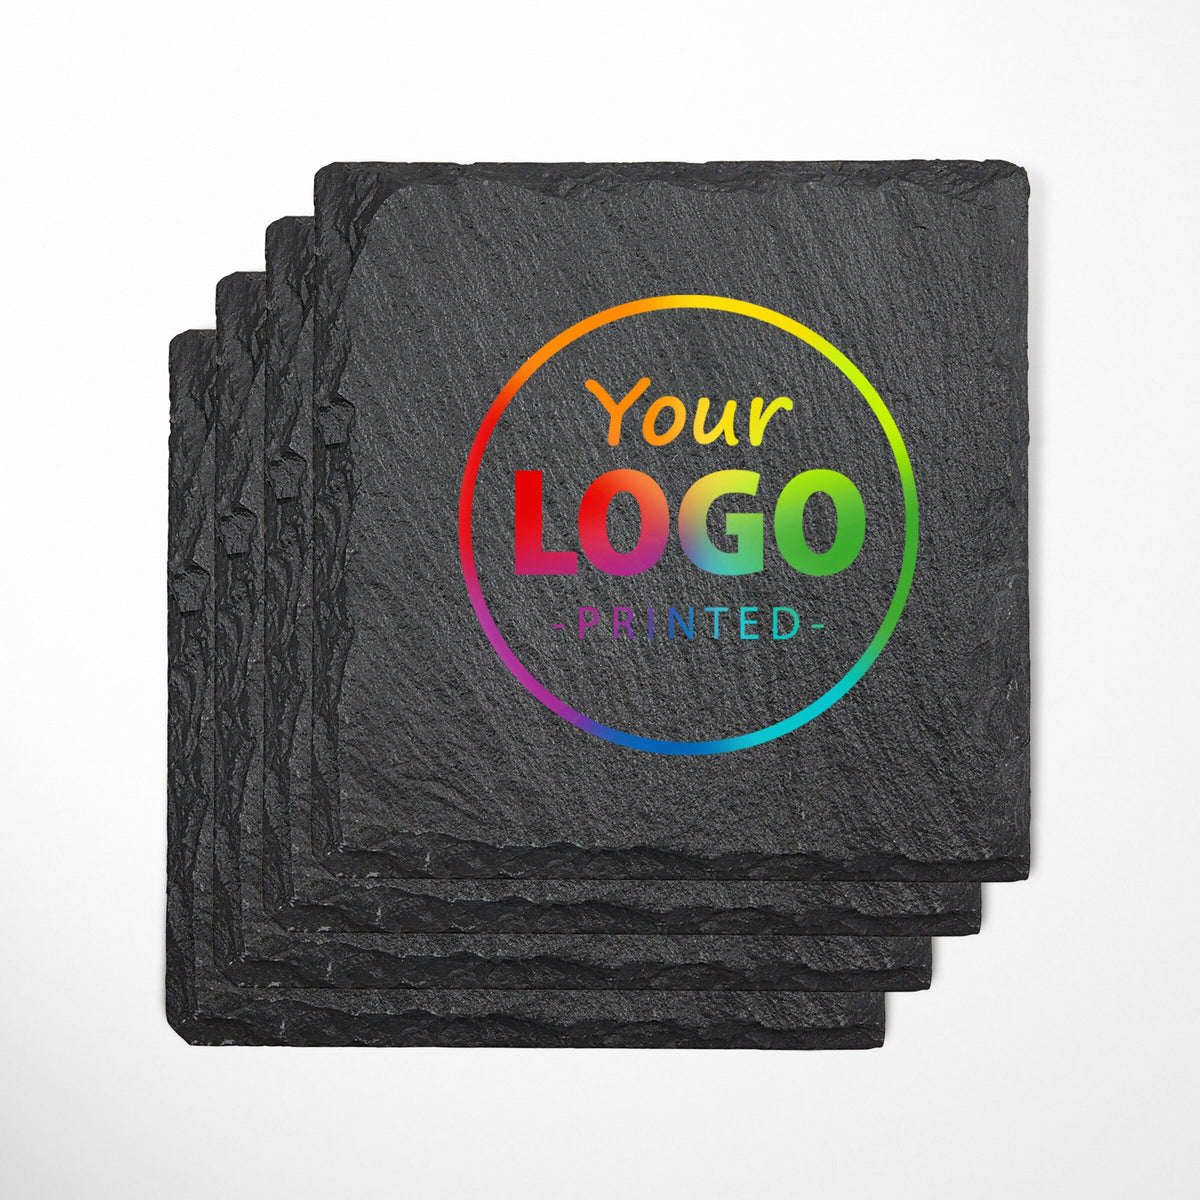 Custom printed slate coasters with your logo or image, Personalized printed slate coasters / Laser engraved SET OF 4